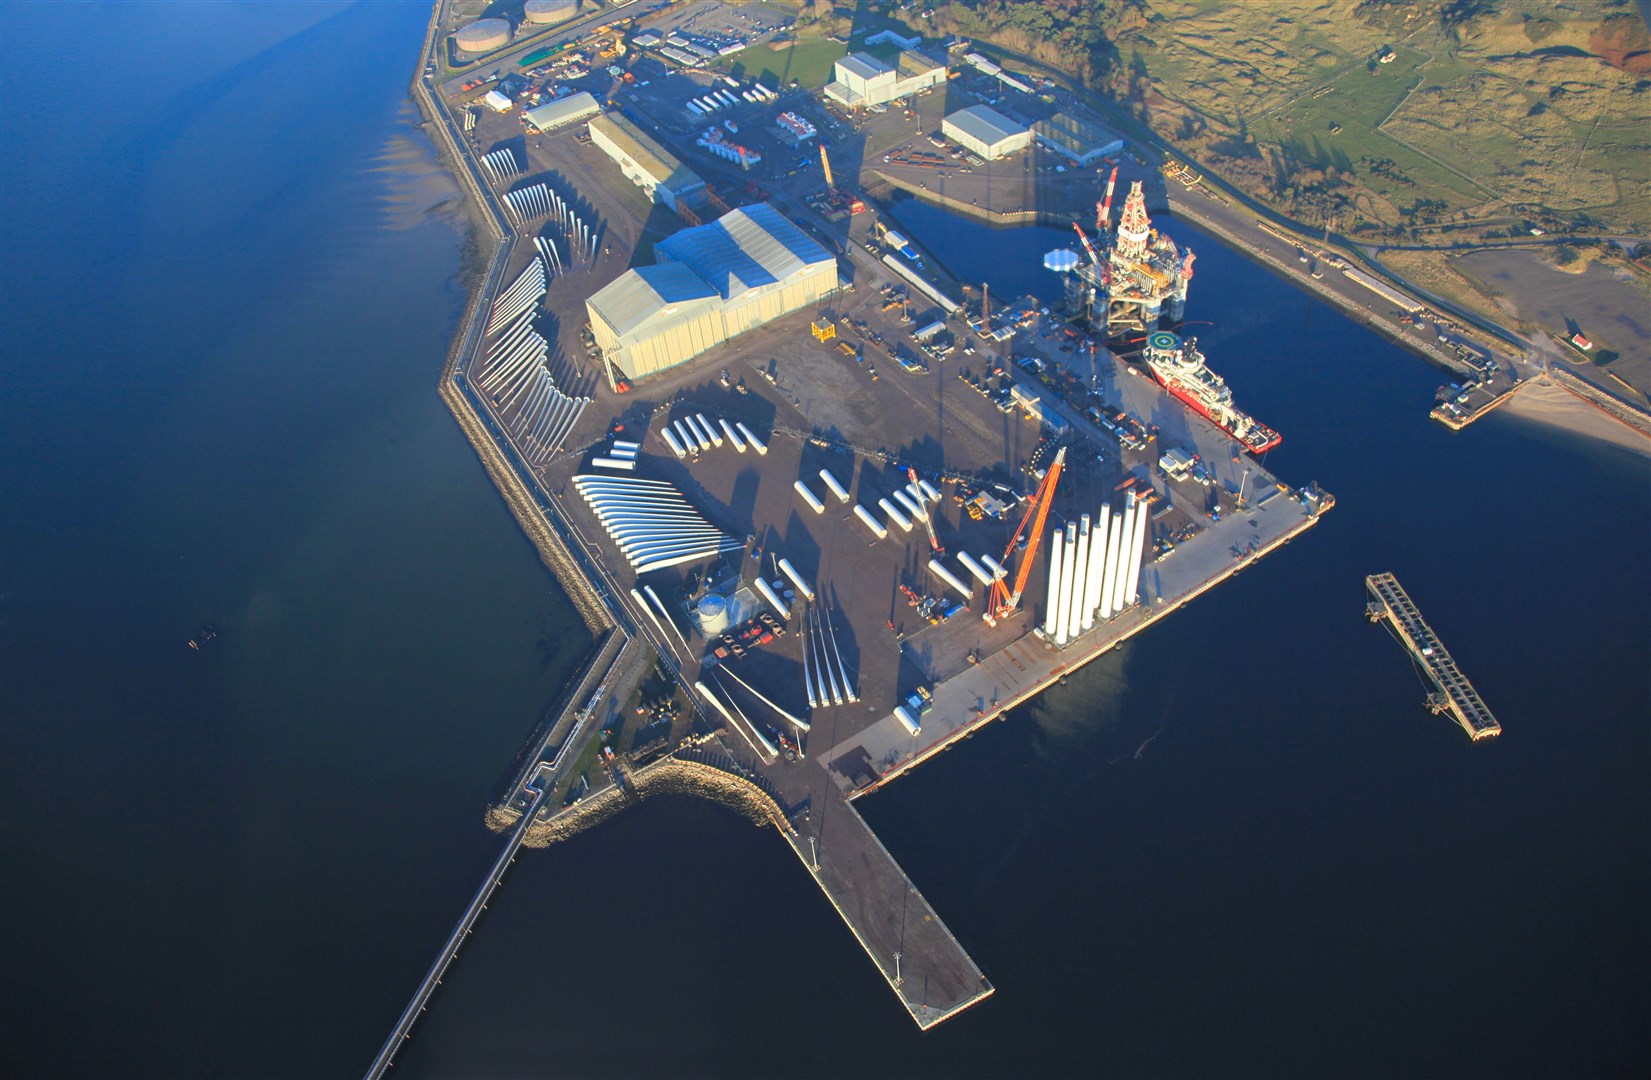 An aerial view of the Port of Nigg.